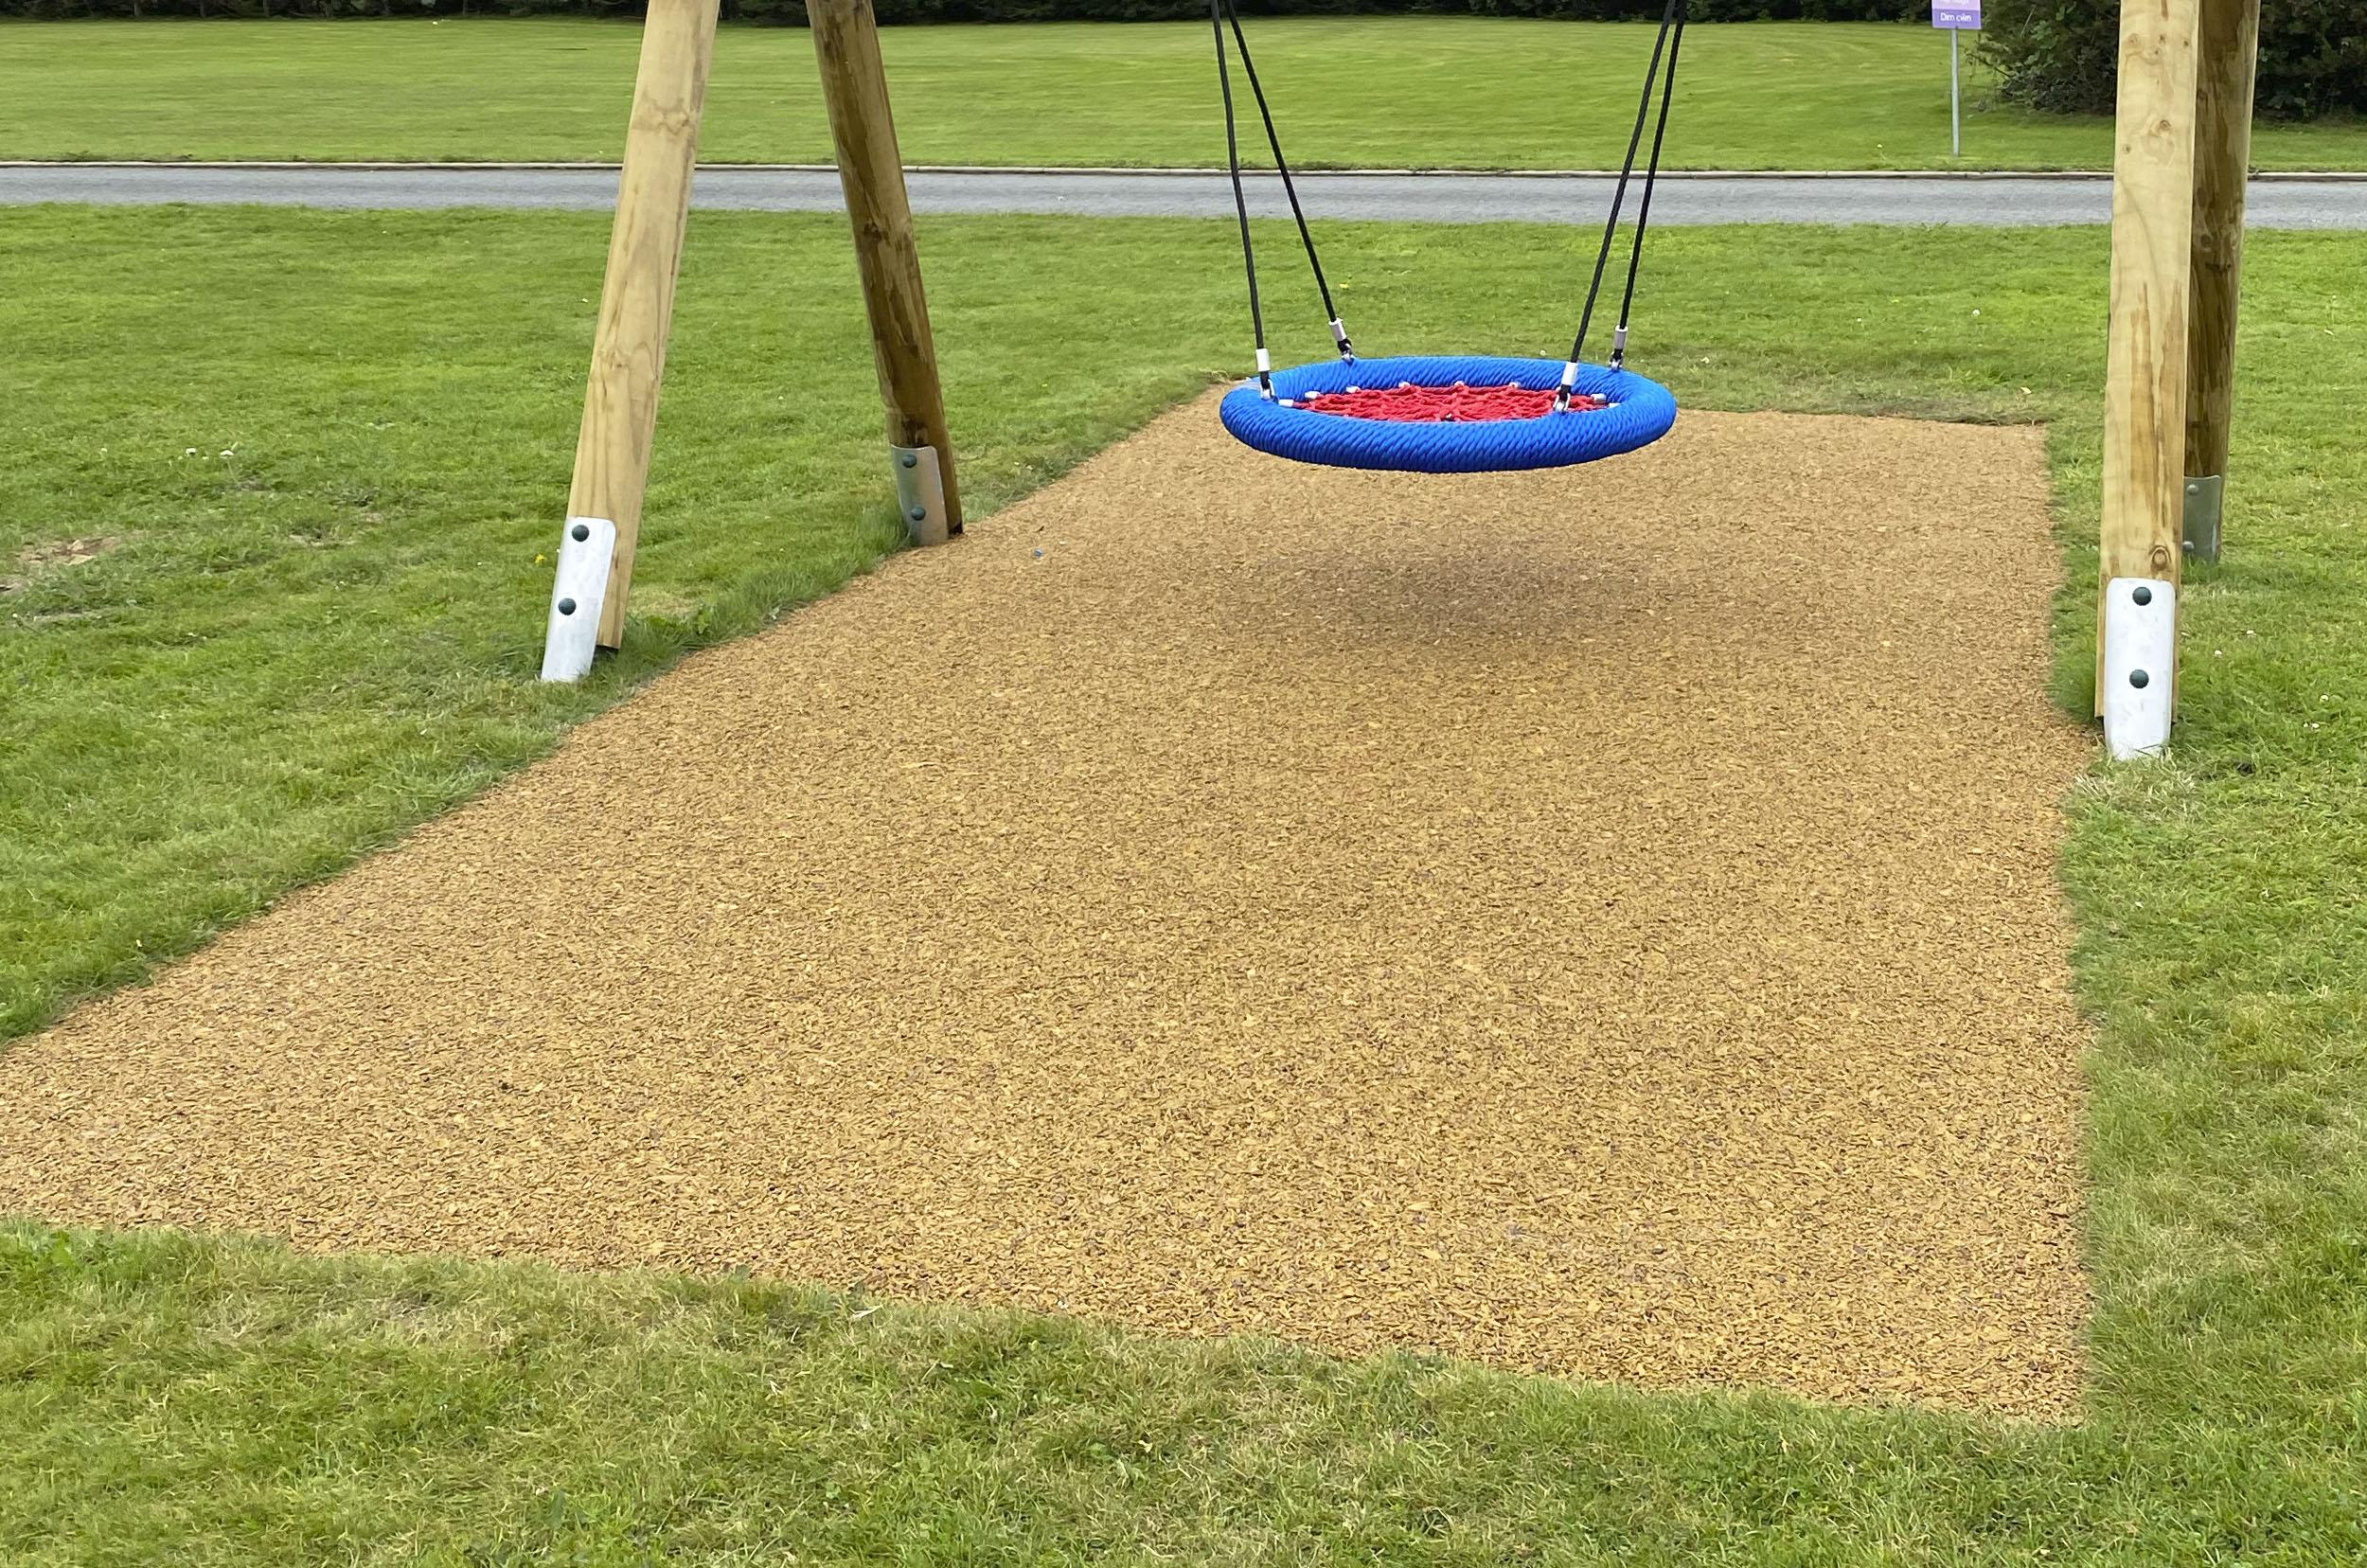 Mulch Wetpour Safer Surfacing - Harvest Beige well a timber swing with blue and red basket seat